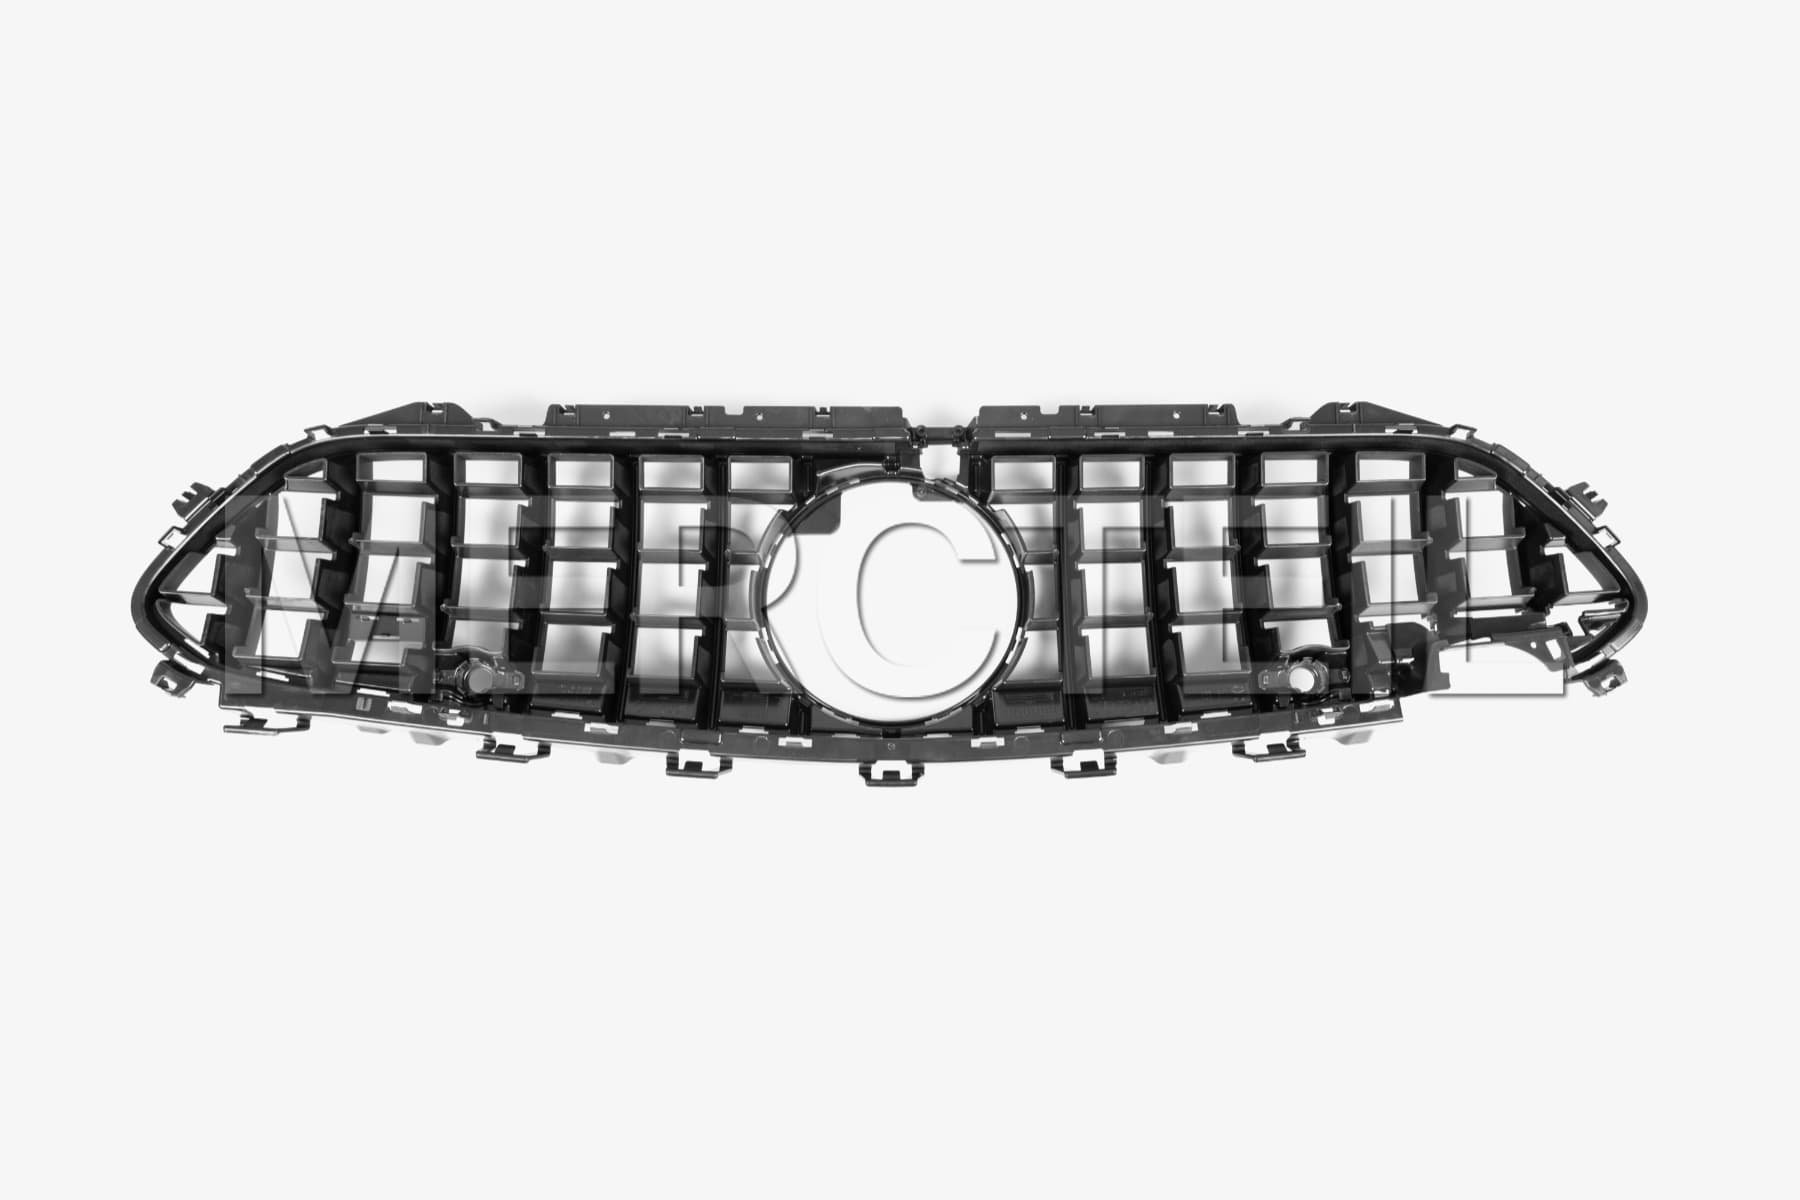 CLS53 AMG Facelift Dark Chrome Panamericana Grille Genuine Mercedes AMG (part number: A2578851104)